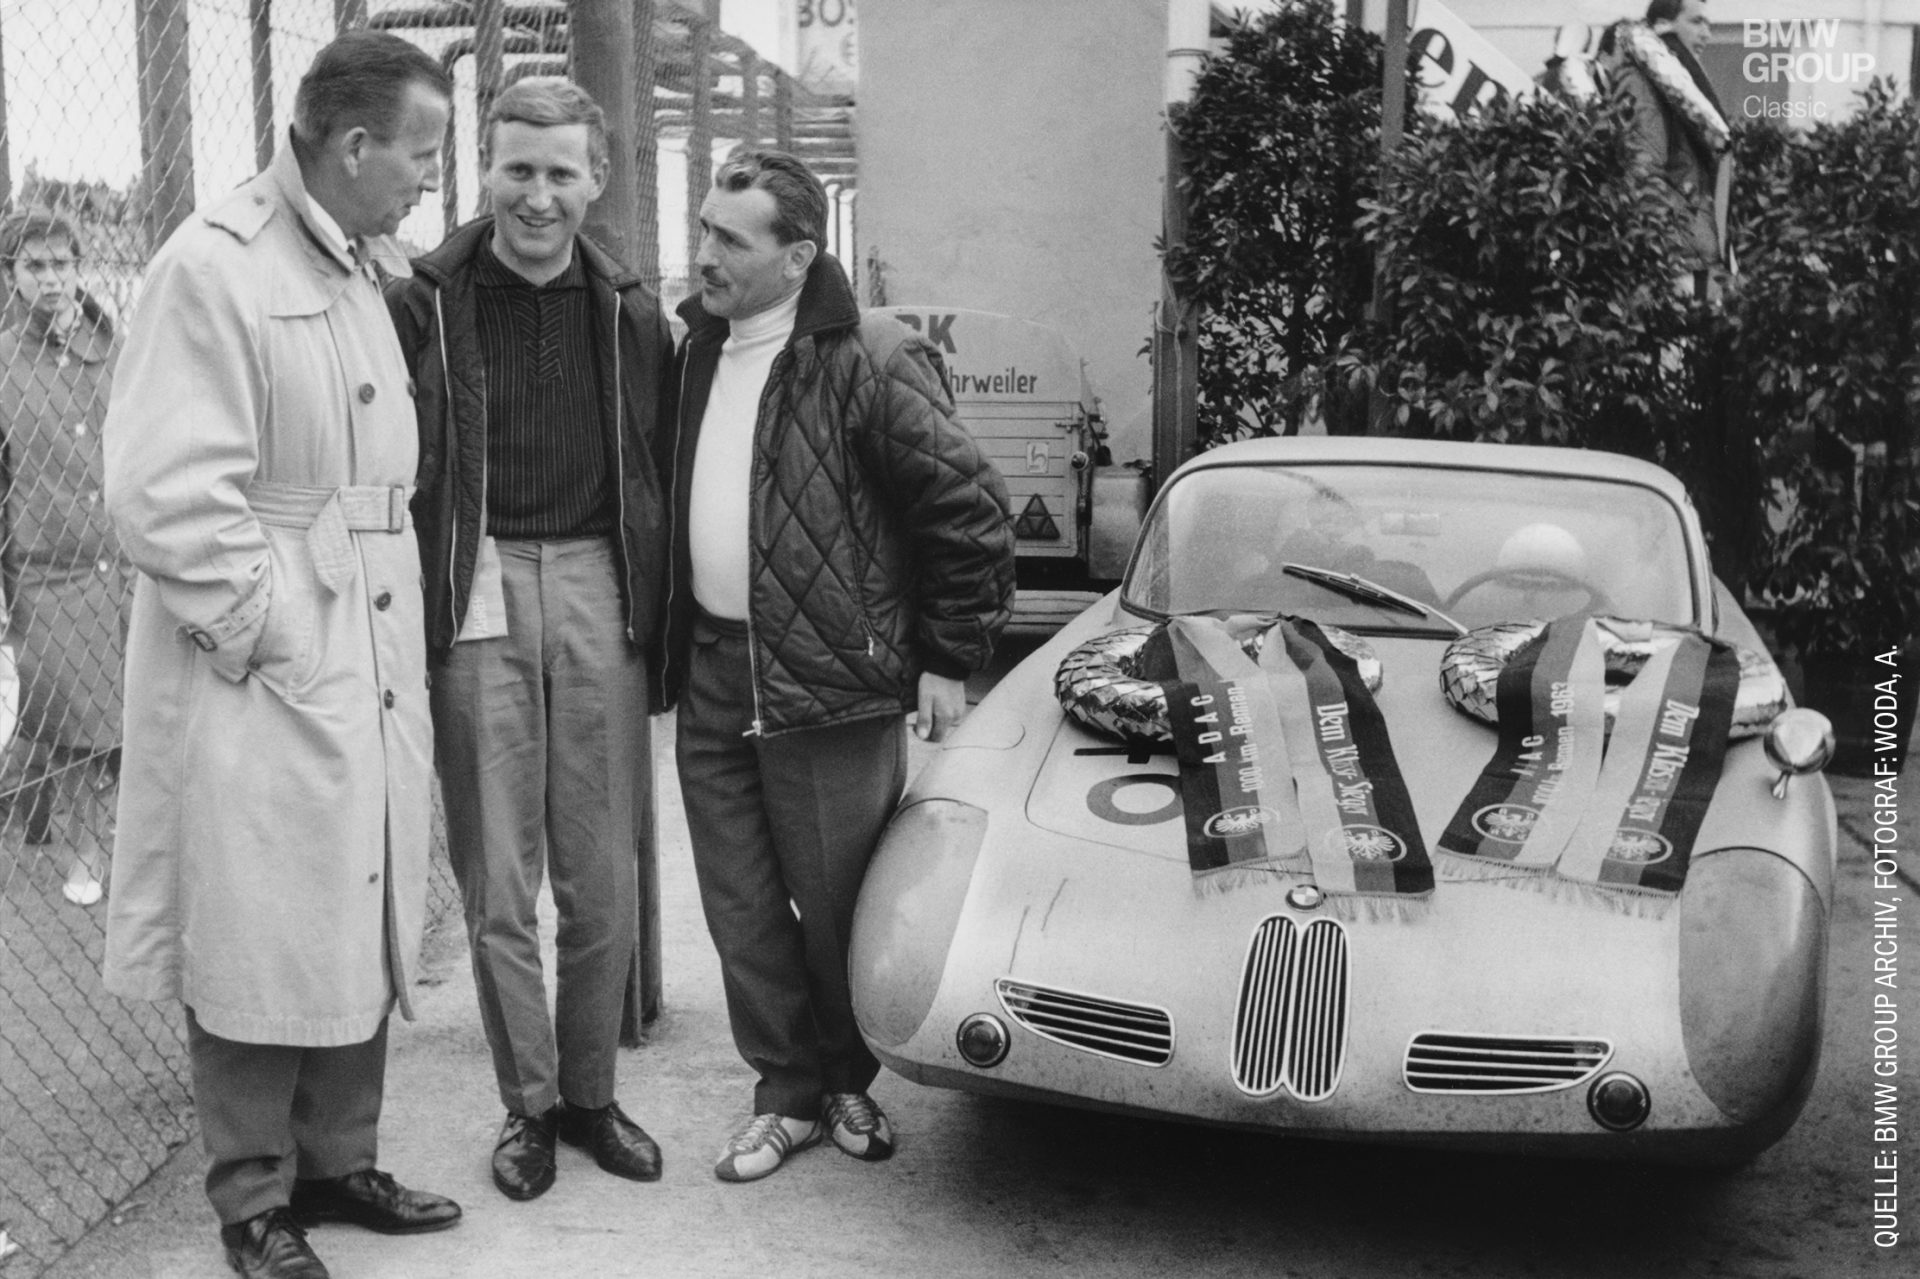 Three men are standing next to a BMW 700